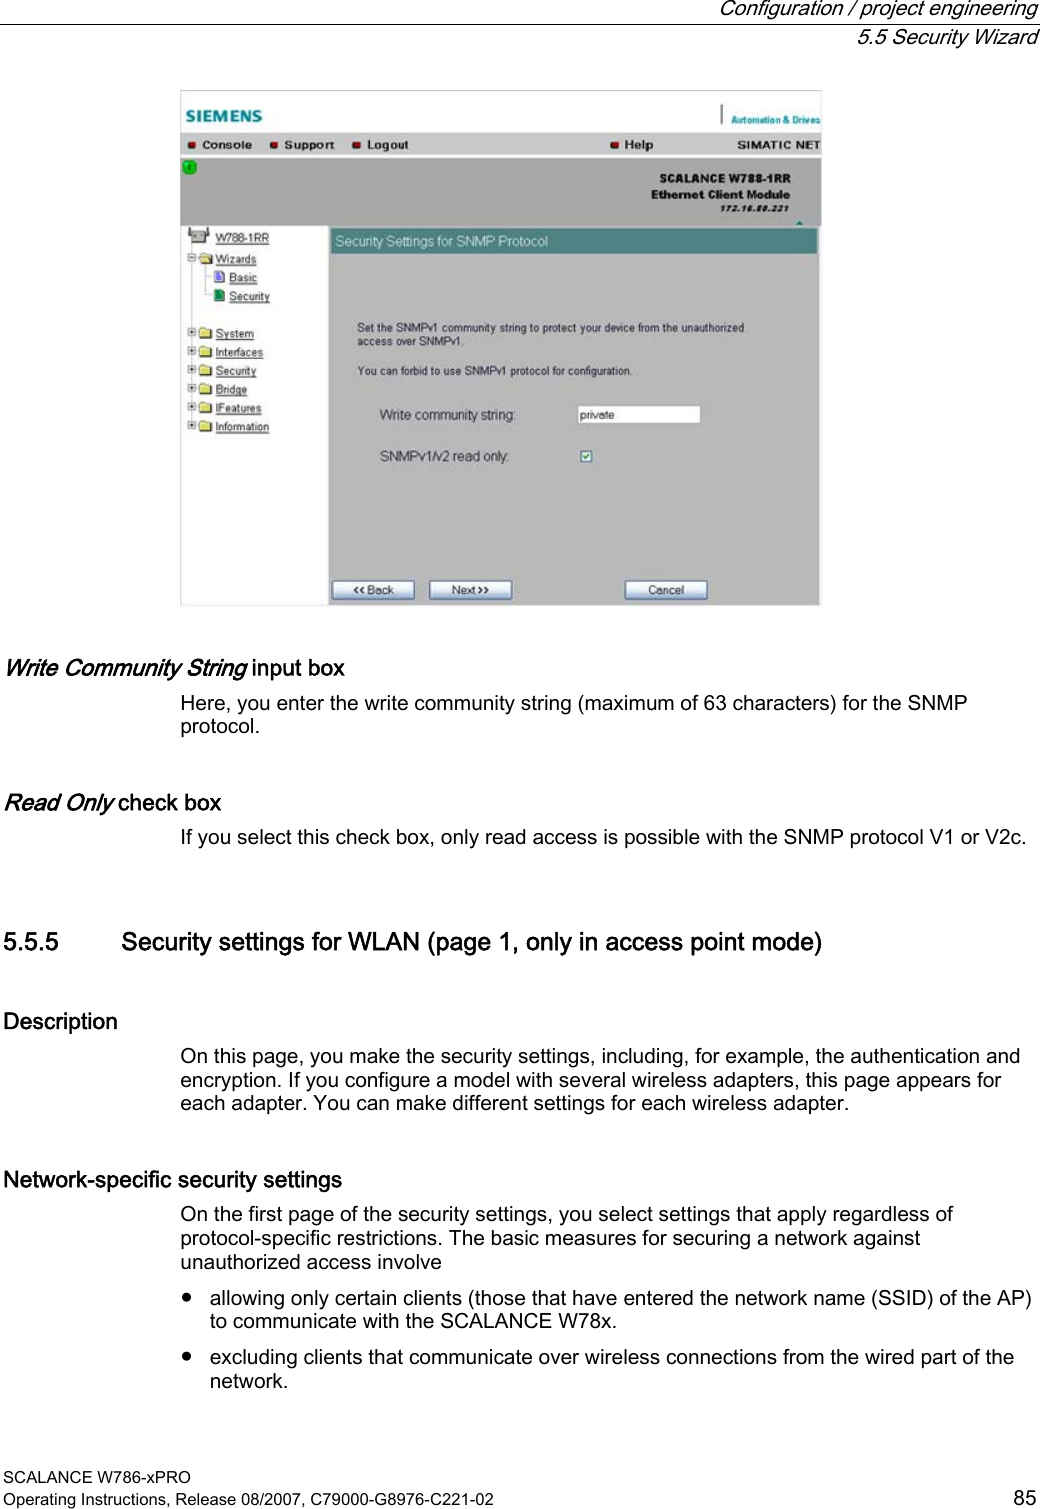  Configuration / project engineering  5.5 Security Wizard SCALANCE W786-xPRO Operating Instructions, Release 08/2007, C79000-G8976-C221-02  85  Write Community String input box Here, you enter the write community string (maximum of 63 characters) for the SNMP protocol. Read Only check box If you select this check box, only read access is possible with the SNMP protocol V1 or V2c. 5.5.5 Security settings for WLAN (page 1, only in access point mode) Description On this page, you make the security settings, including, for example, the authentication and encryption. If you configure a model with several wireless adapters, this page appears for each adapter. You can make different settings for each wireless adapter. Network-specific security settings On the first page of the security settings, you select settings that apply regardless of protocol-specific restrictions. The basic measures for securing a network against unauthorized access involve ● allowing only certain clients (those that have entered the network name (SSID) of the AP) to communicate with the SCALANCE W78x. ● excluding clients that communicate over wireless connections from the wired part of the network. 